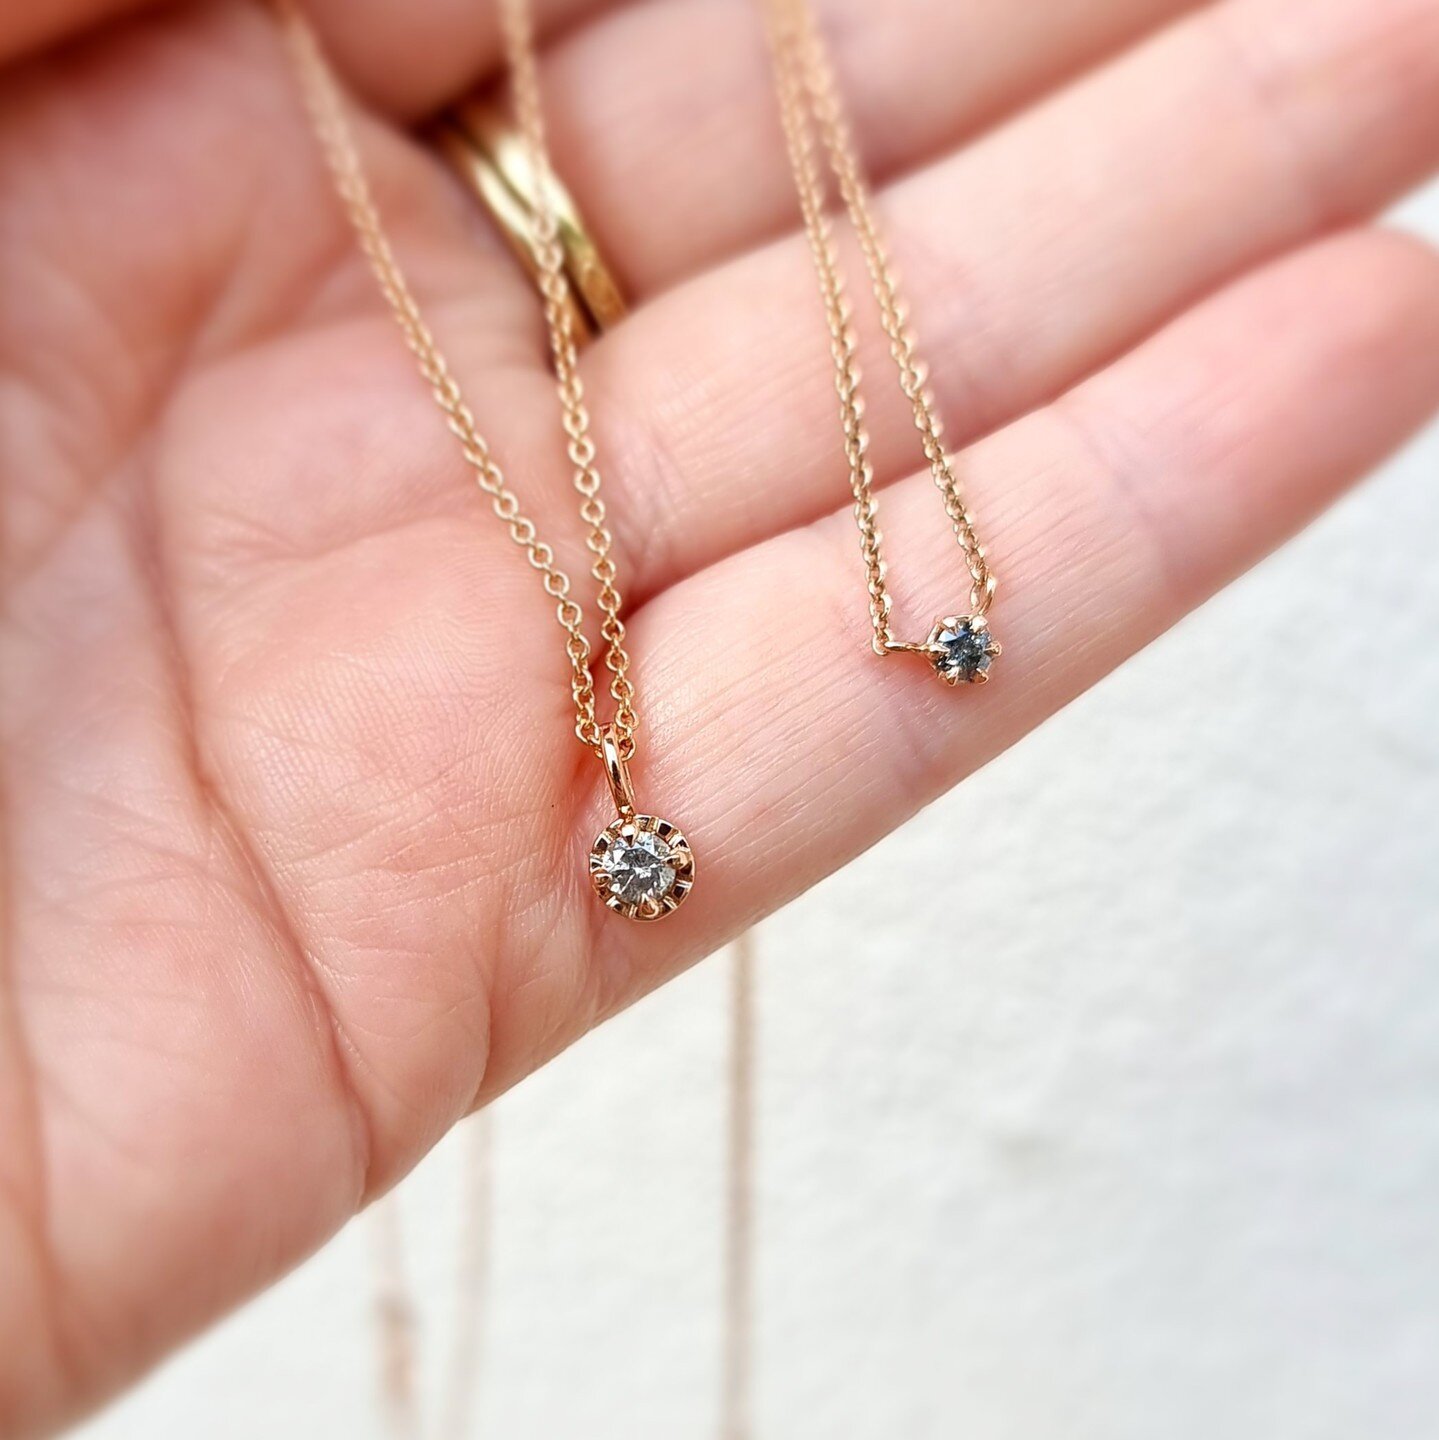 Diamonds aren't just for rings you know! We love seeing jewellers using our stones in pendants. What do you think of these two beautiful creations? ⁠
⁠
Created by @kraaifine.⁠
⁠
⁠
#rounddiamond  #saltandpepper #black diamond #greydiamond #diamond #co